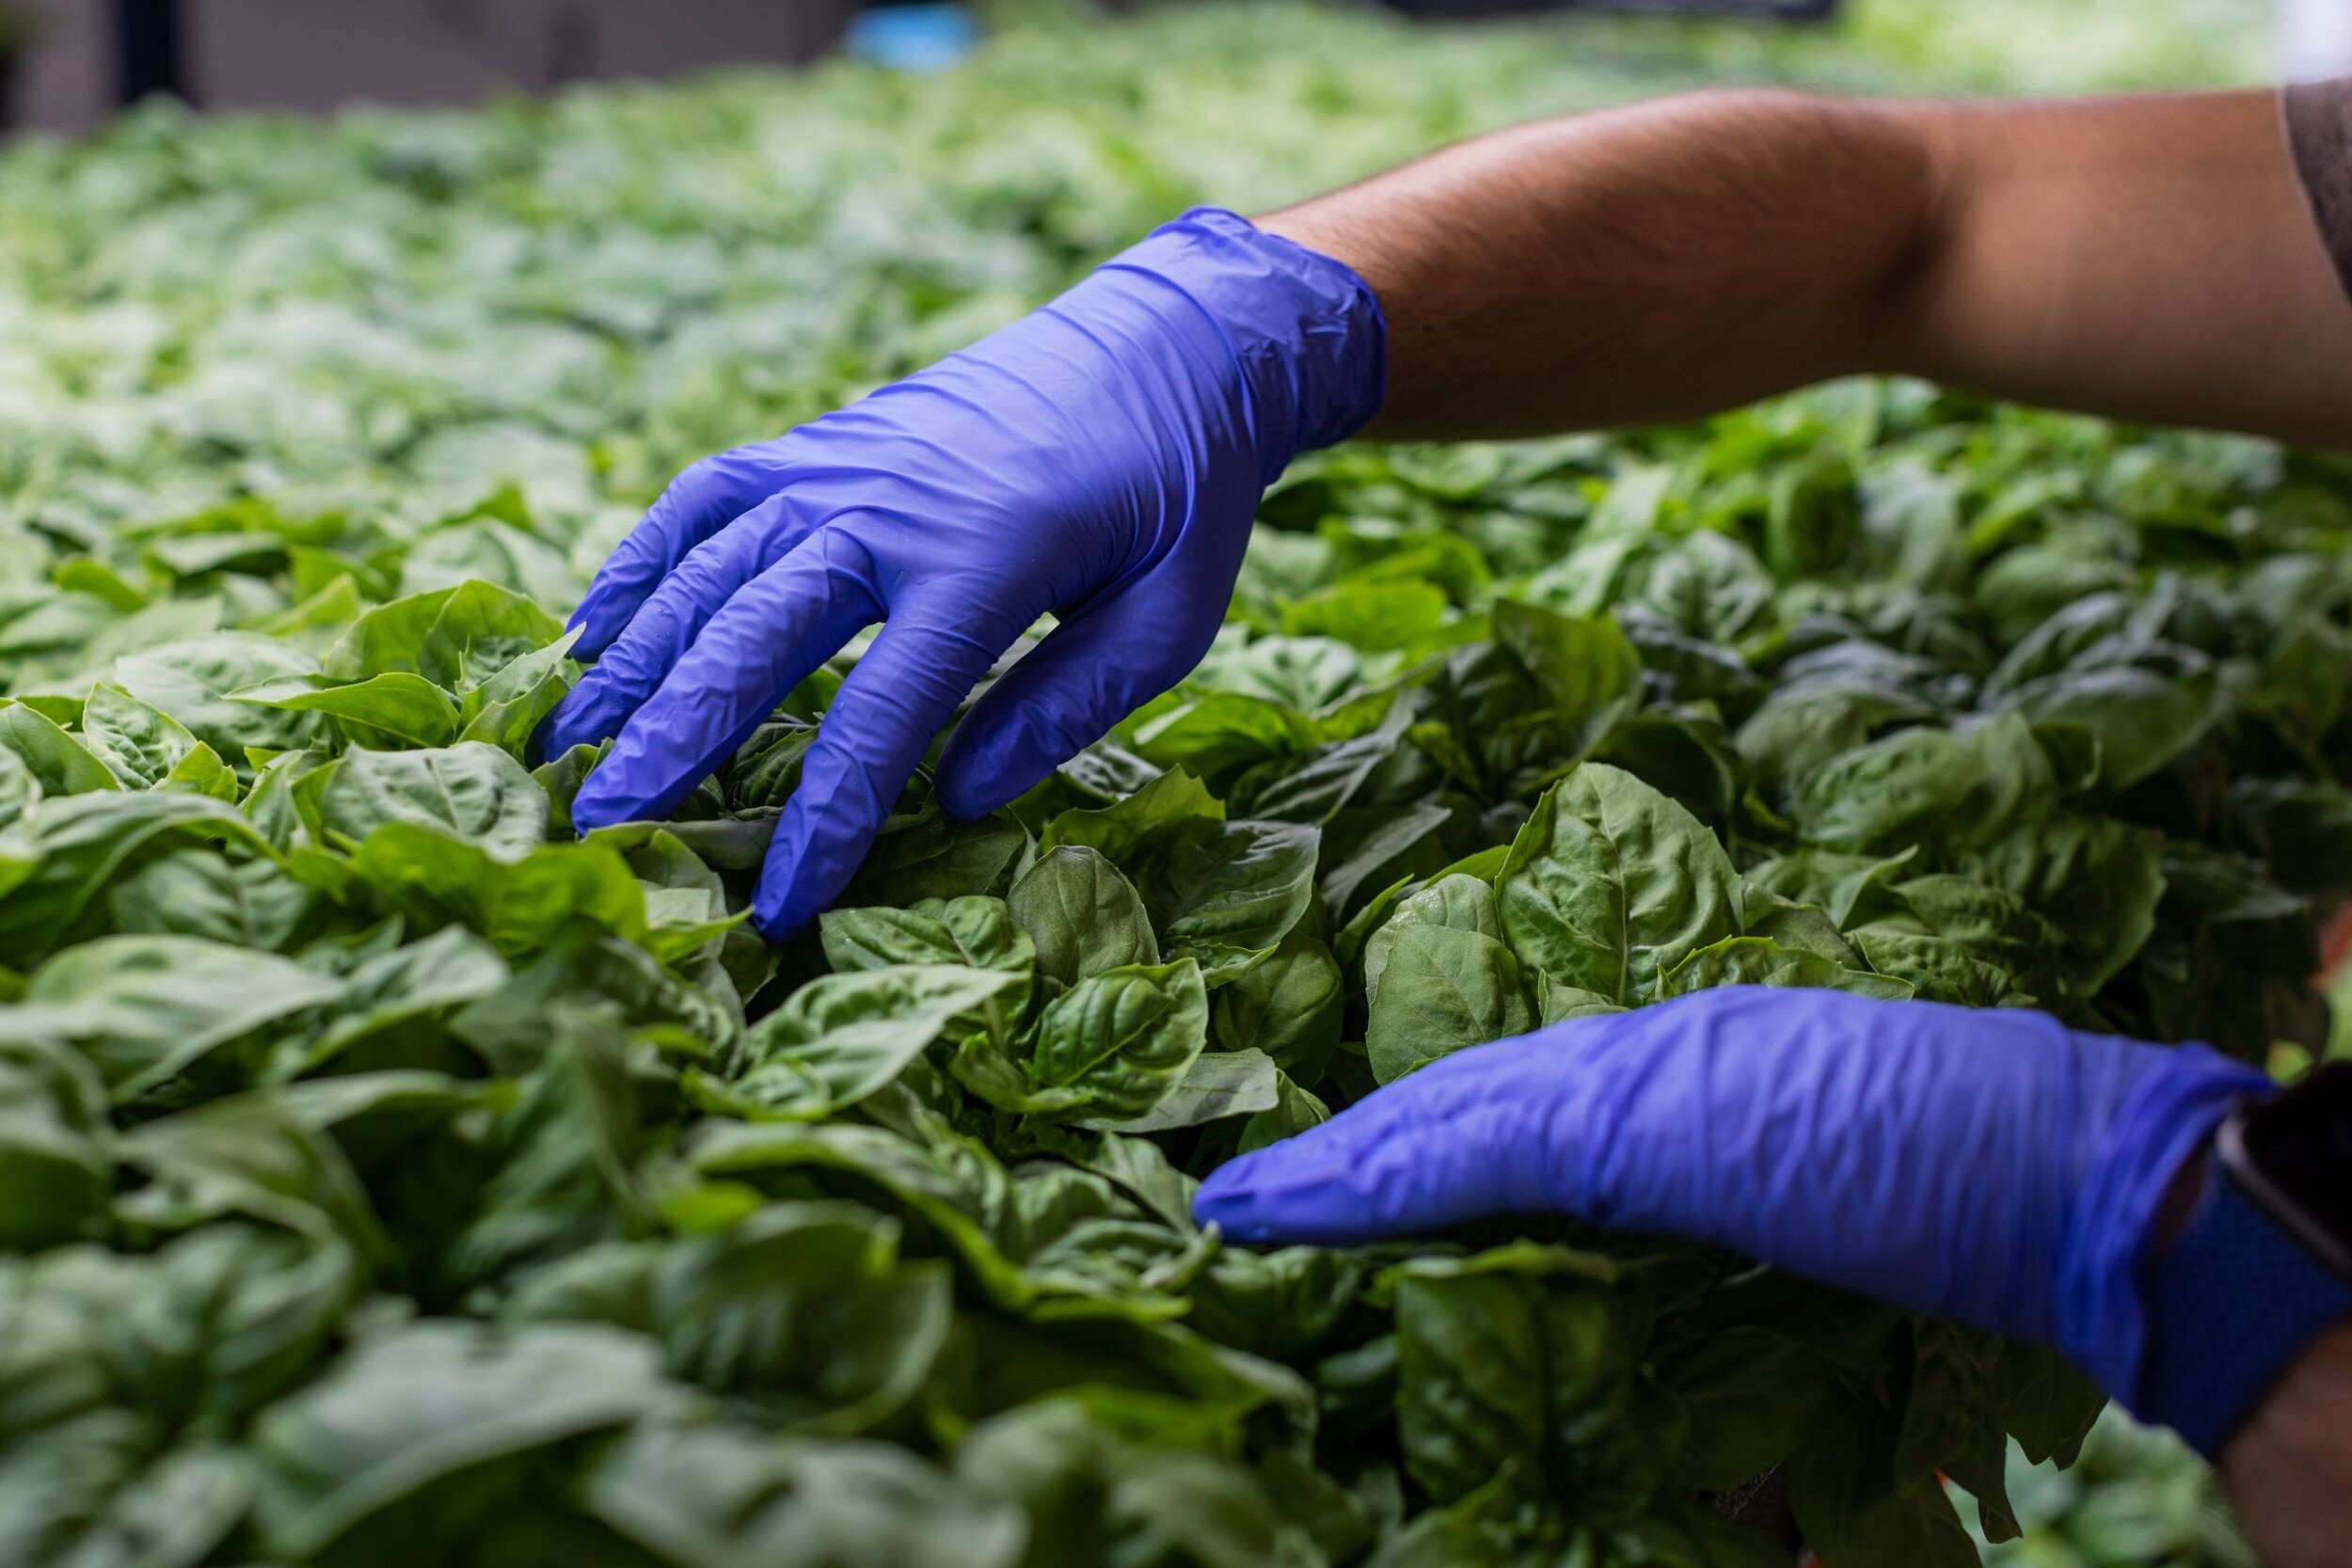 Basil plants at Dream Harvest Farming’s Houston warehouse. Photograph by Michael Starghill Jr. for The Wall Street Journal.